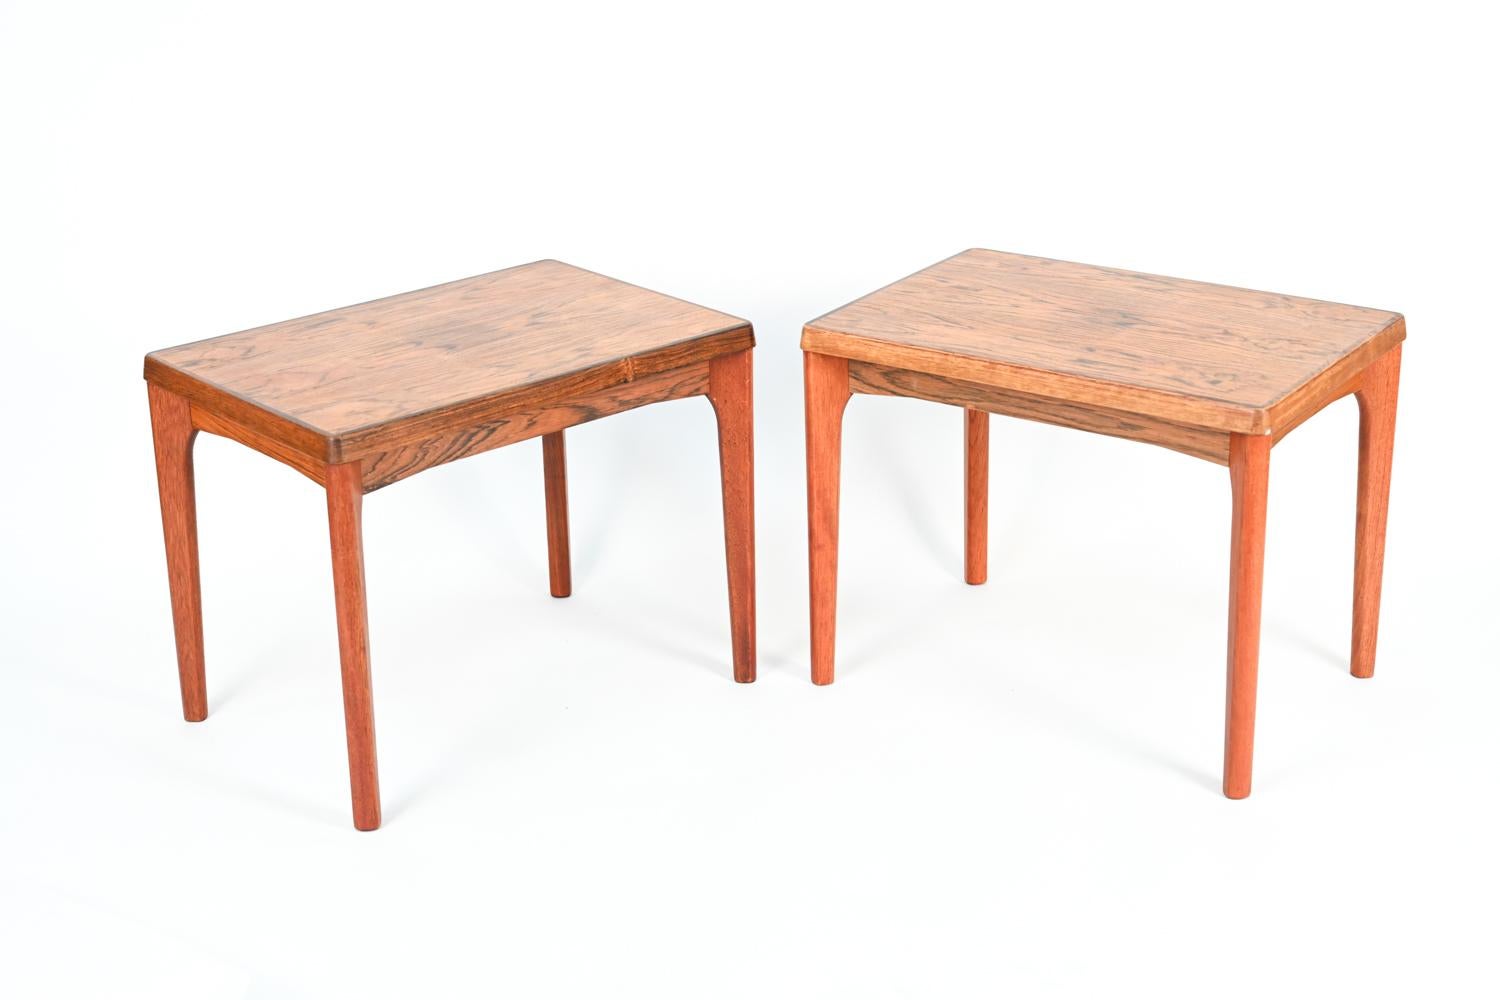 An attractive pair of Danish mid-century rosewood side tables designed by Henning Kjaernulff and produced by Vejle Stole Møbelfabrik, with manufacturer's stamp underneath.